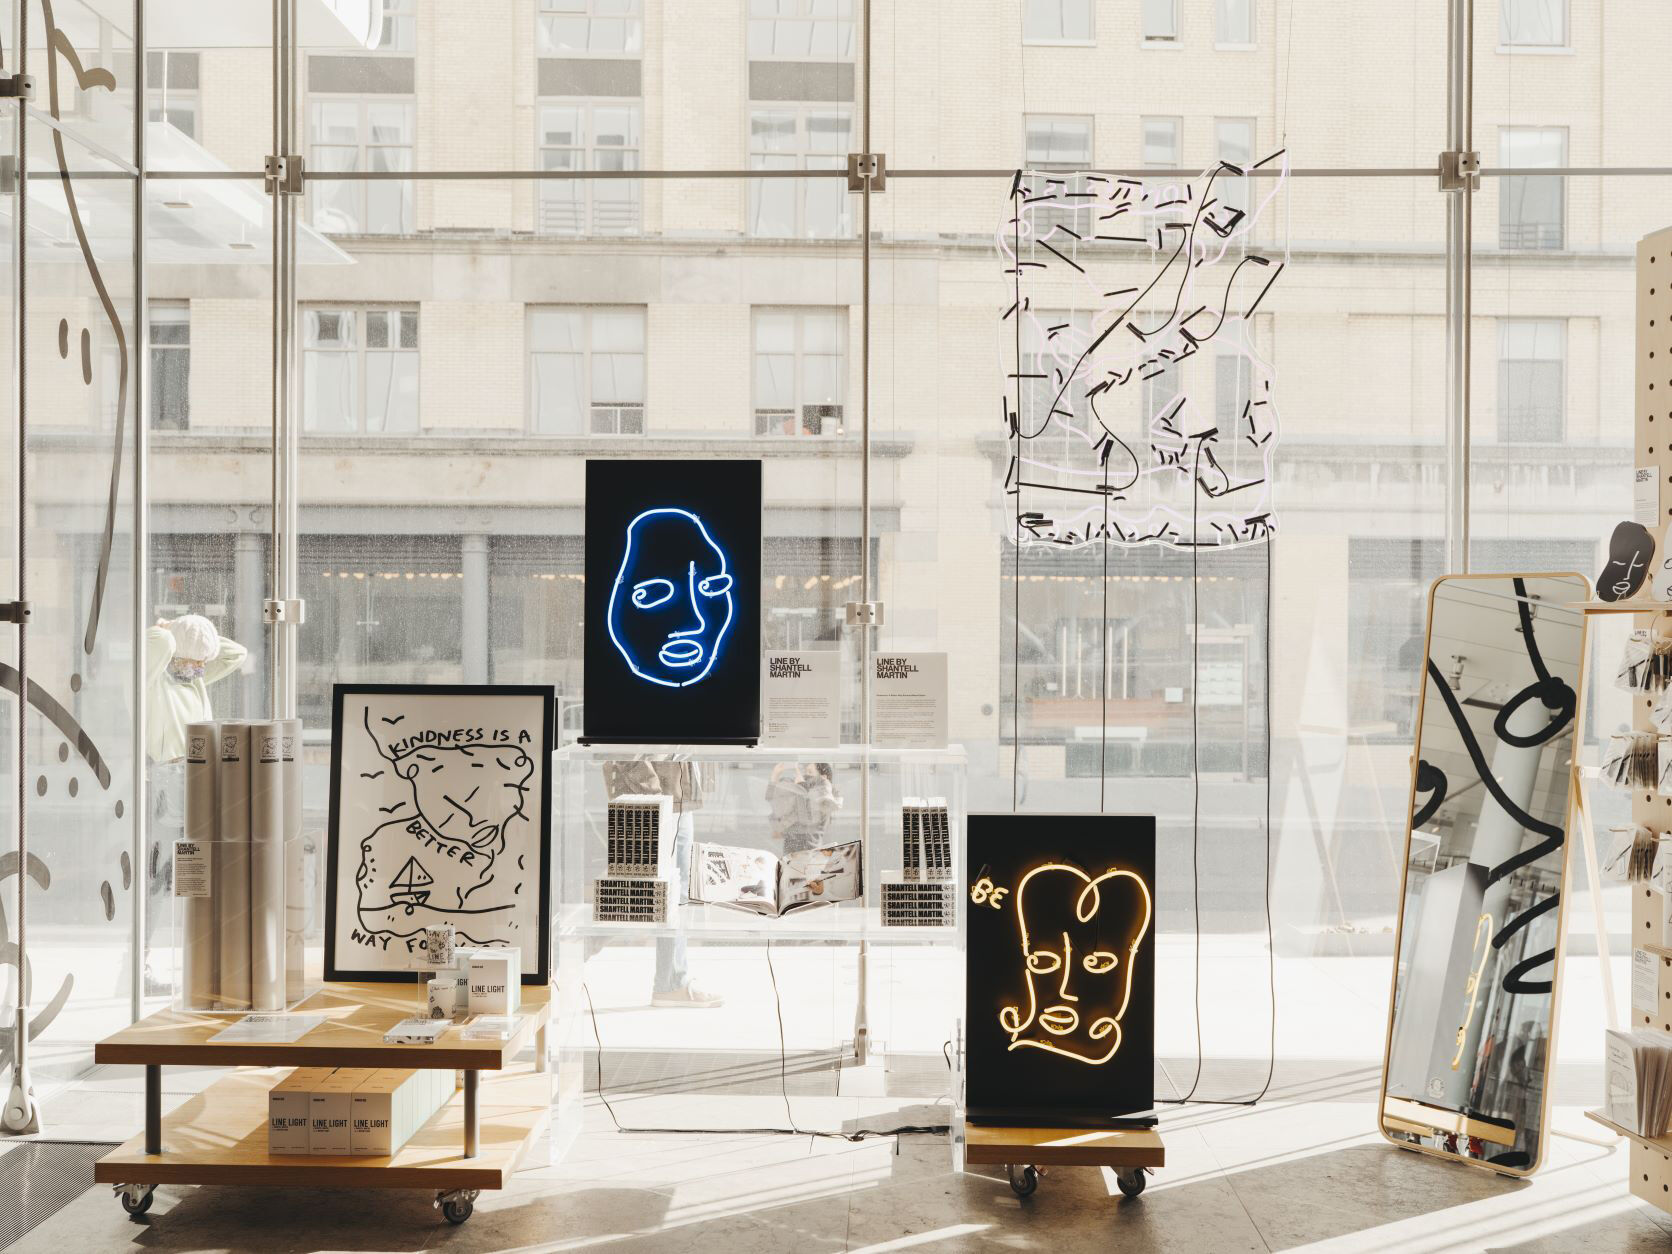 Whitney Shop windows featuring Shantell Martin line art faces and text clip products.